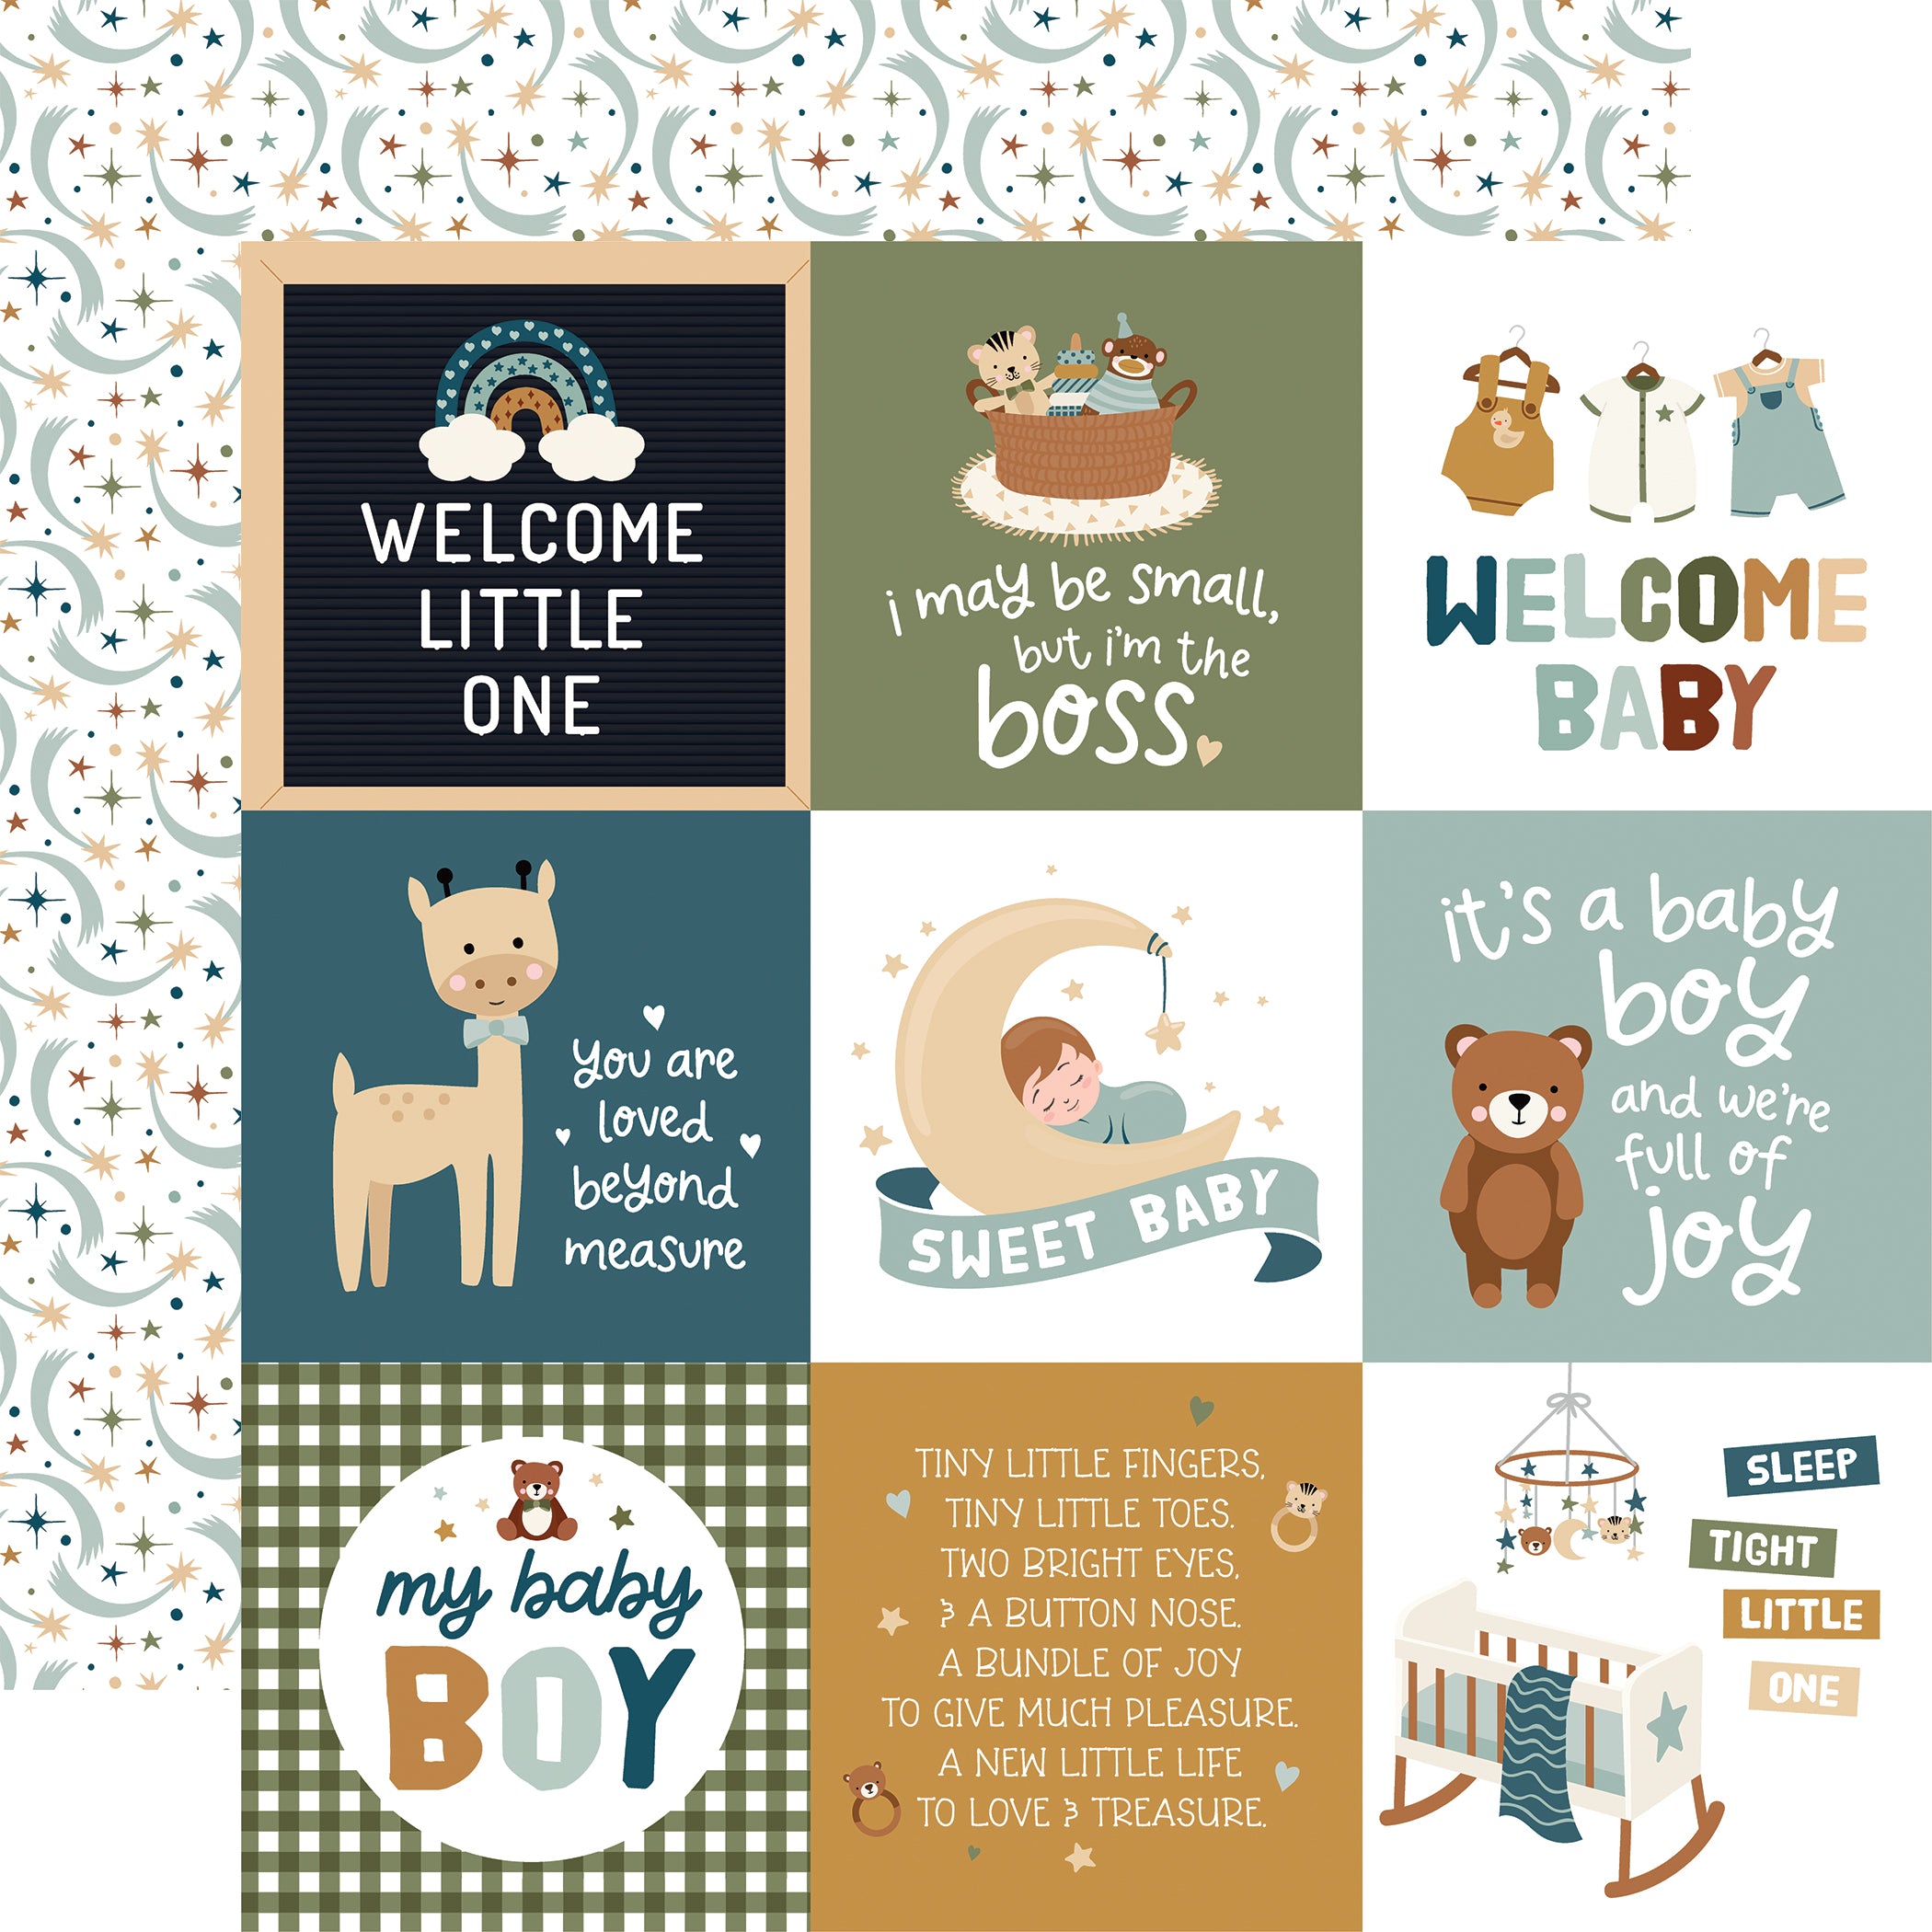 Special Delivery Baby Boy Collection 12 x 12 Scrapbook Collection Kit by Echo Park Paper